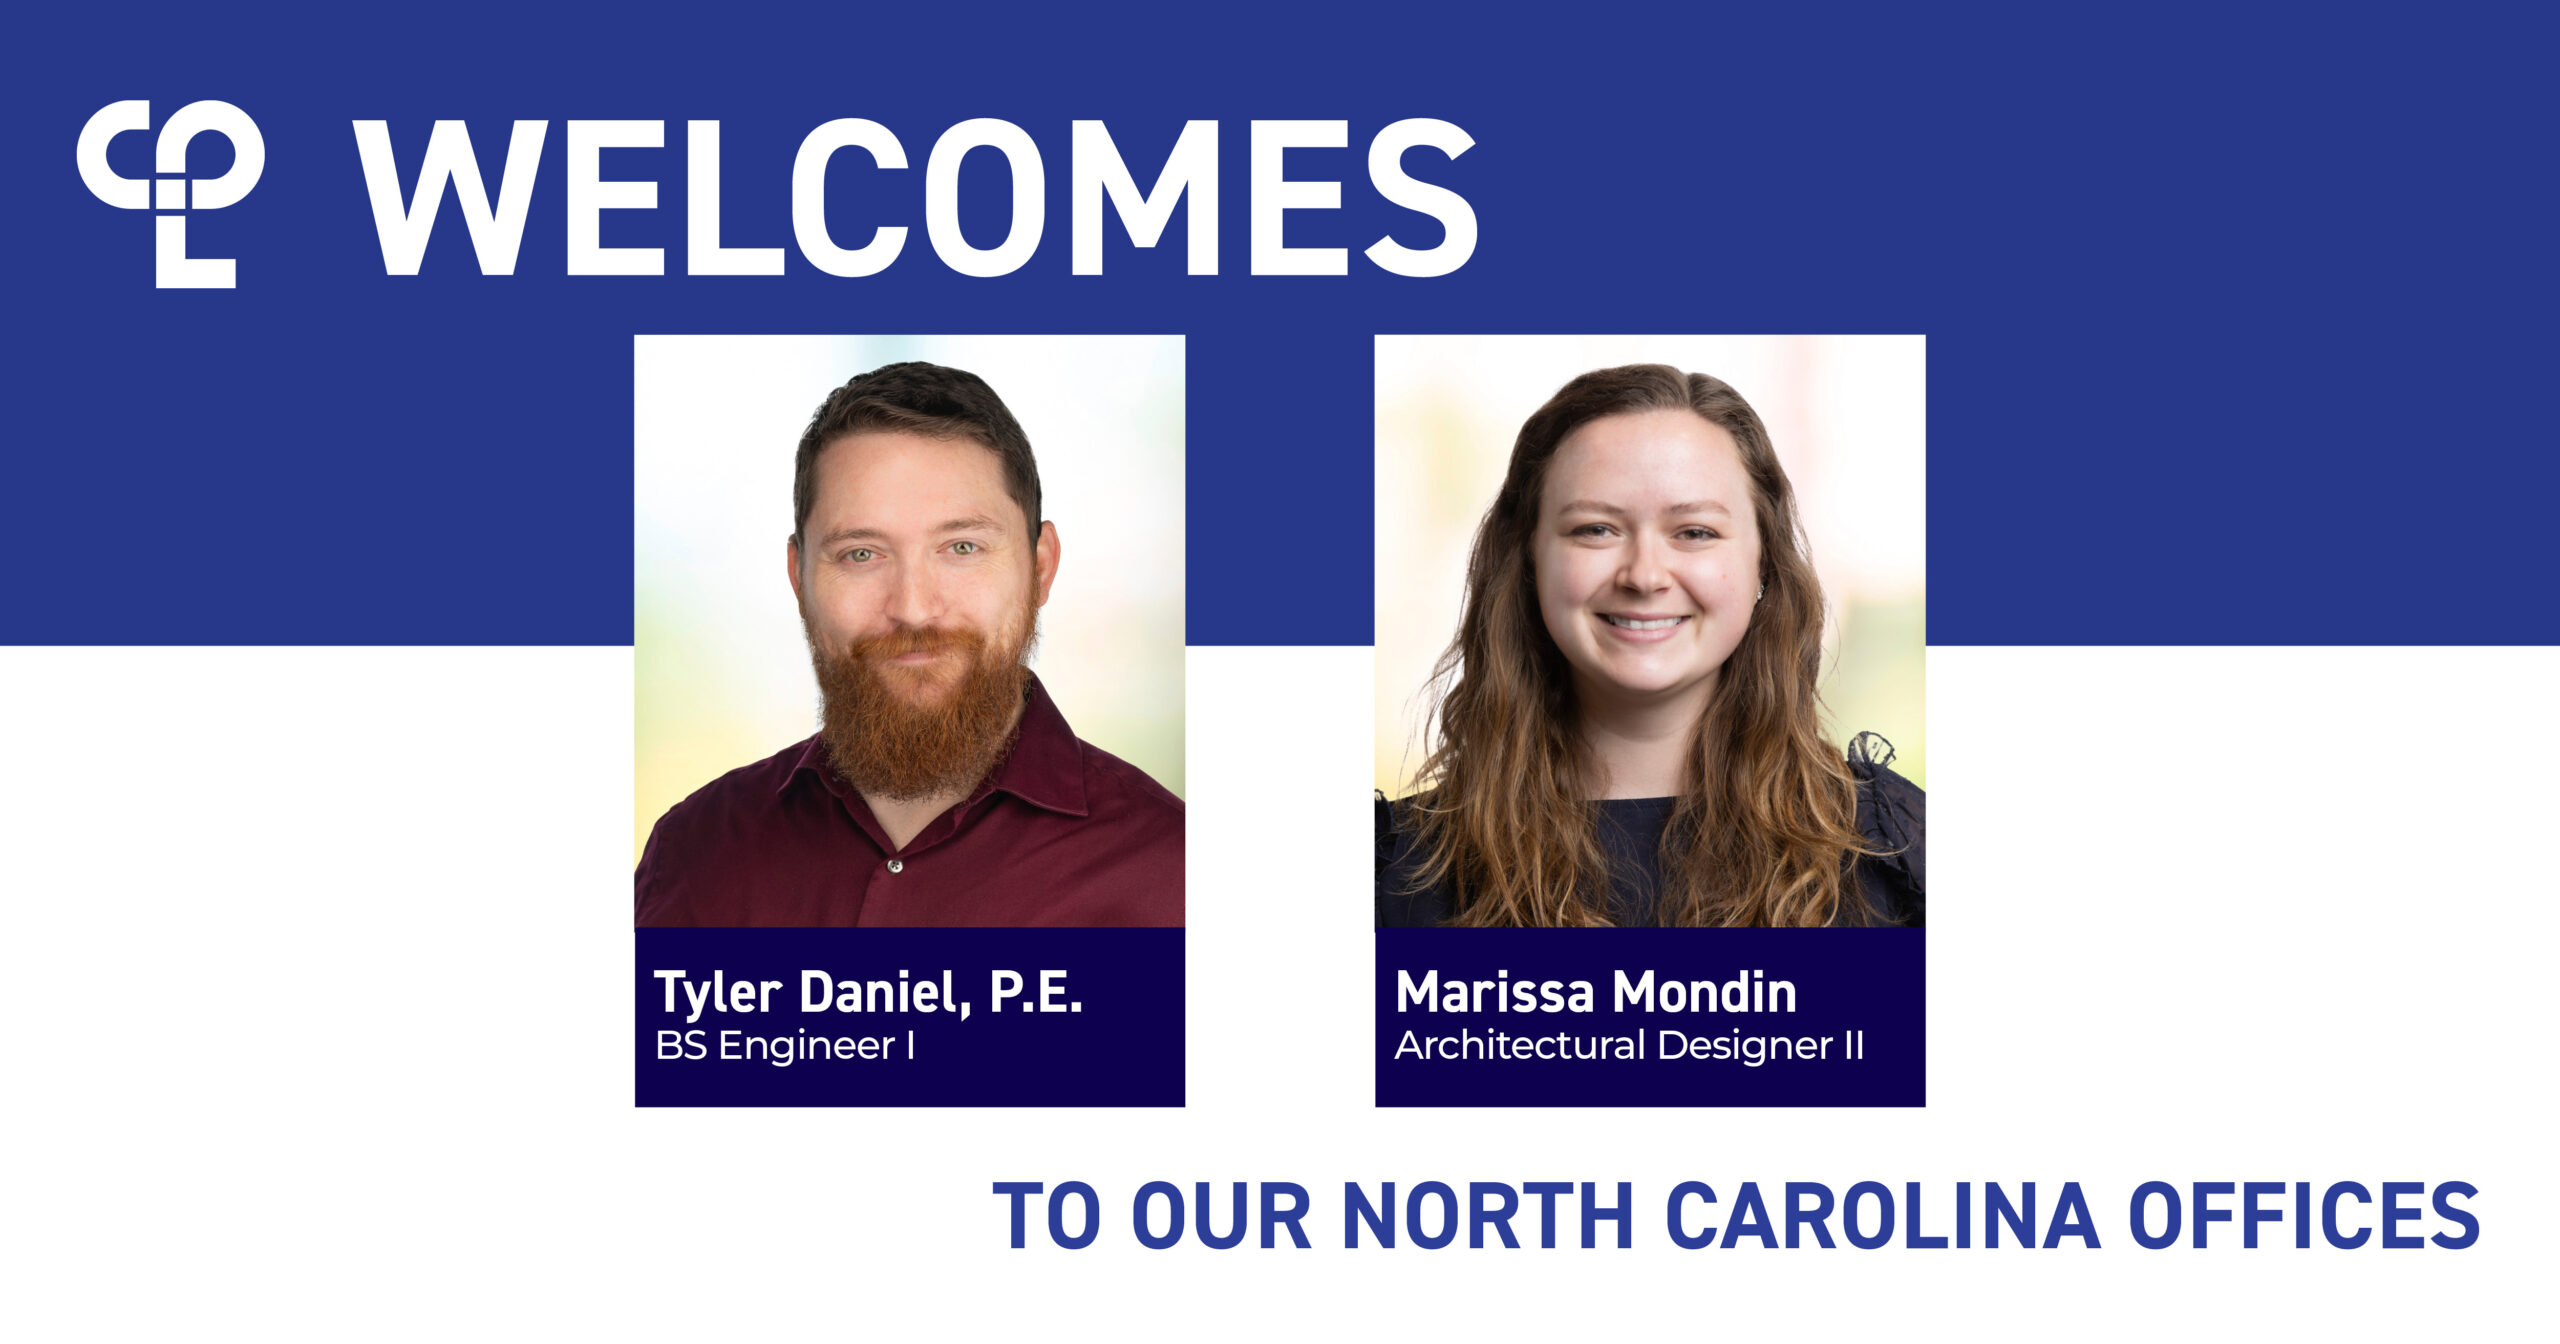 CPL welcomes Tyler Daniel and Marissa Mondin to its offices in North Carolina.